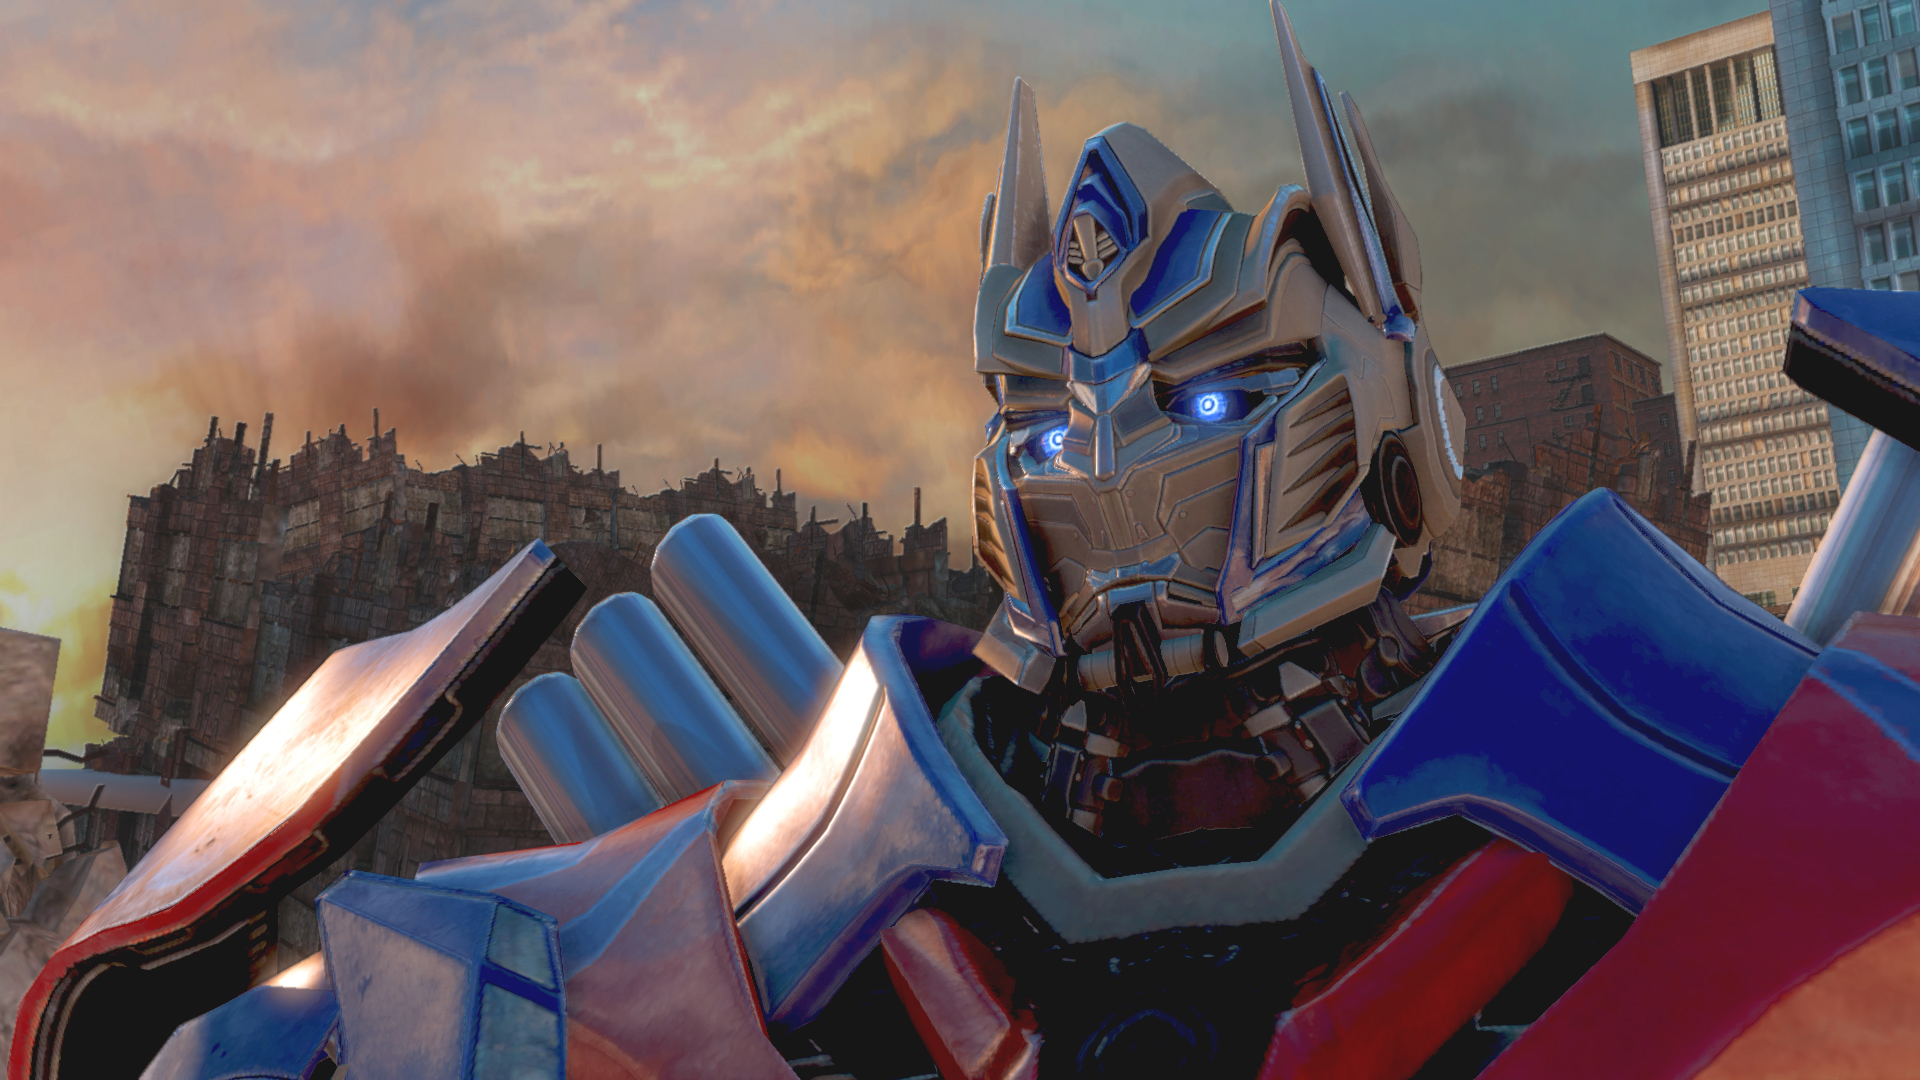 The Next Transformers Game Crosses Continuity Lines. I’m Scared.